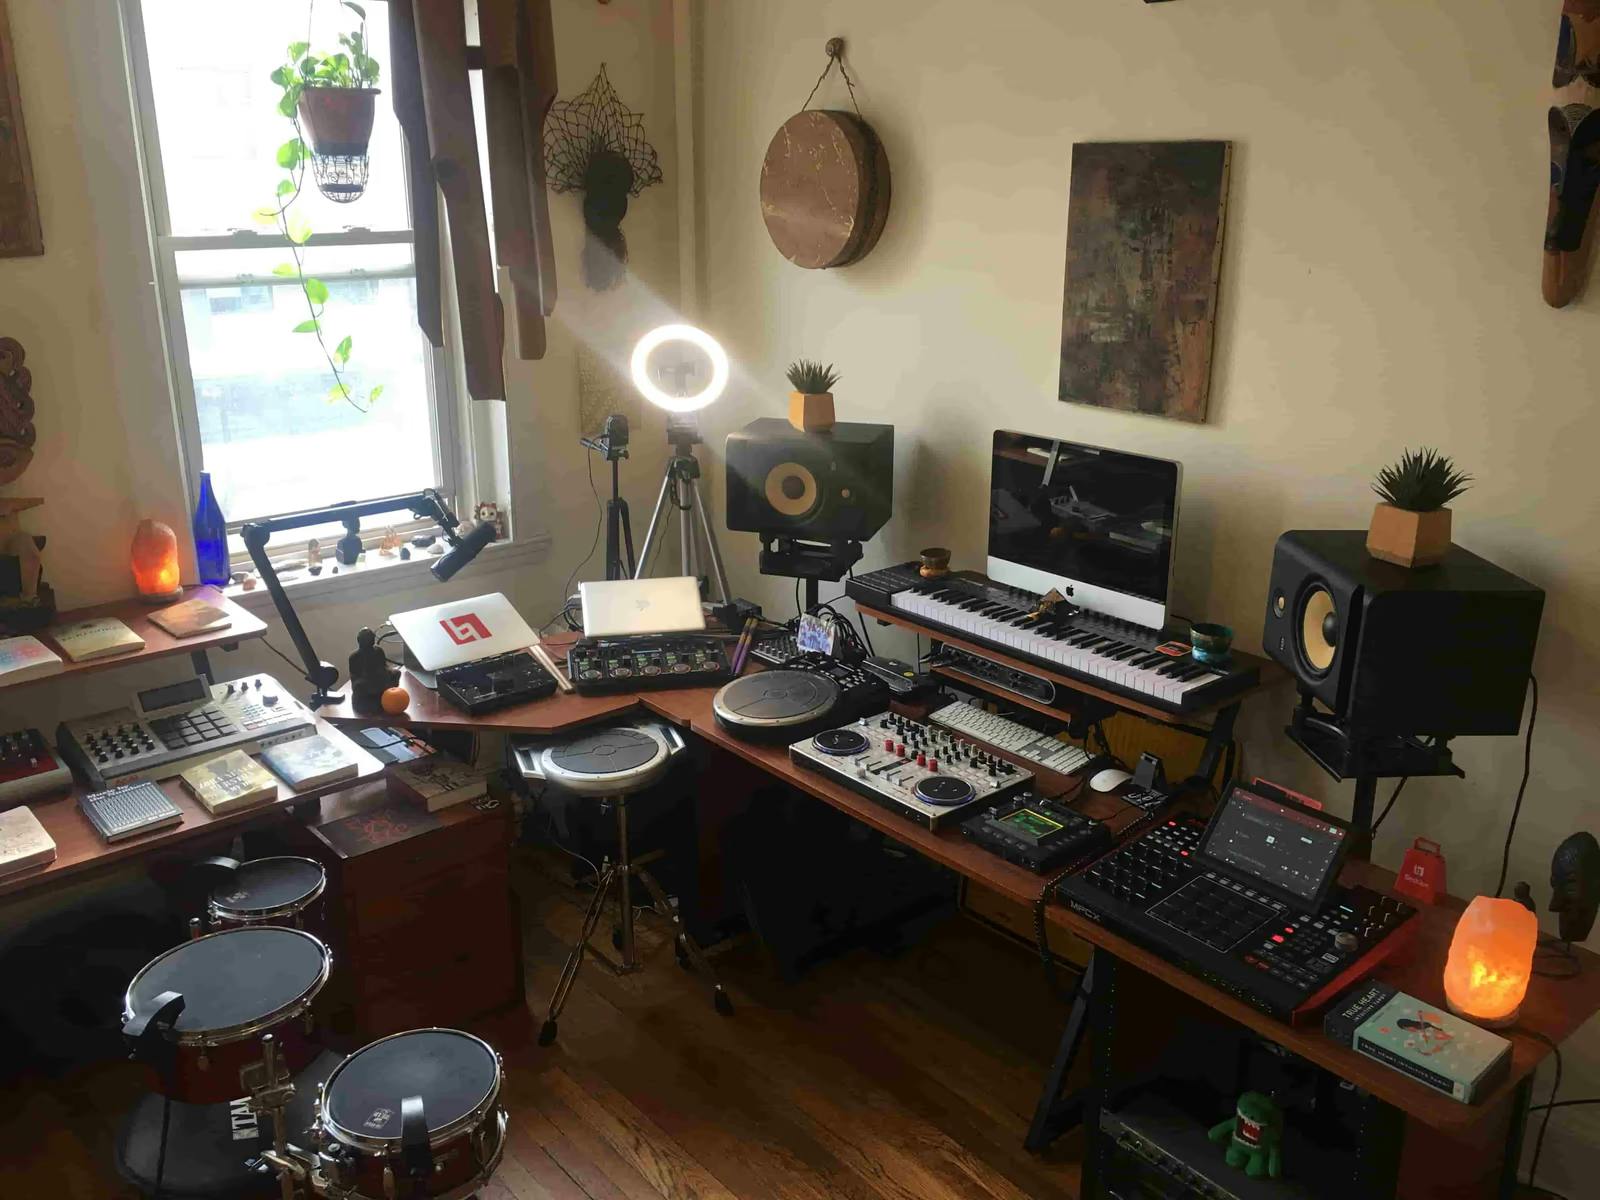 An overhead shot of Val's well lit studio showing all of the technology listed below (and more) with Afro-Hatian art on the walls, a hanging plant in the window, and one small potted plant on each studio speaker